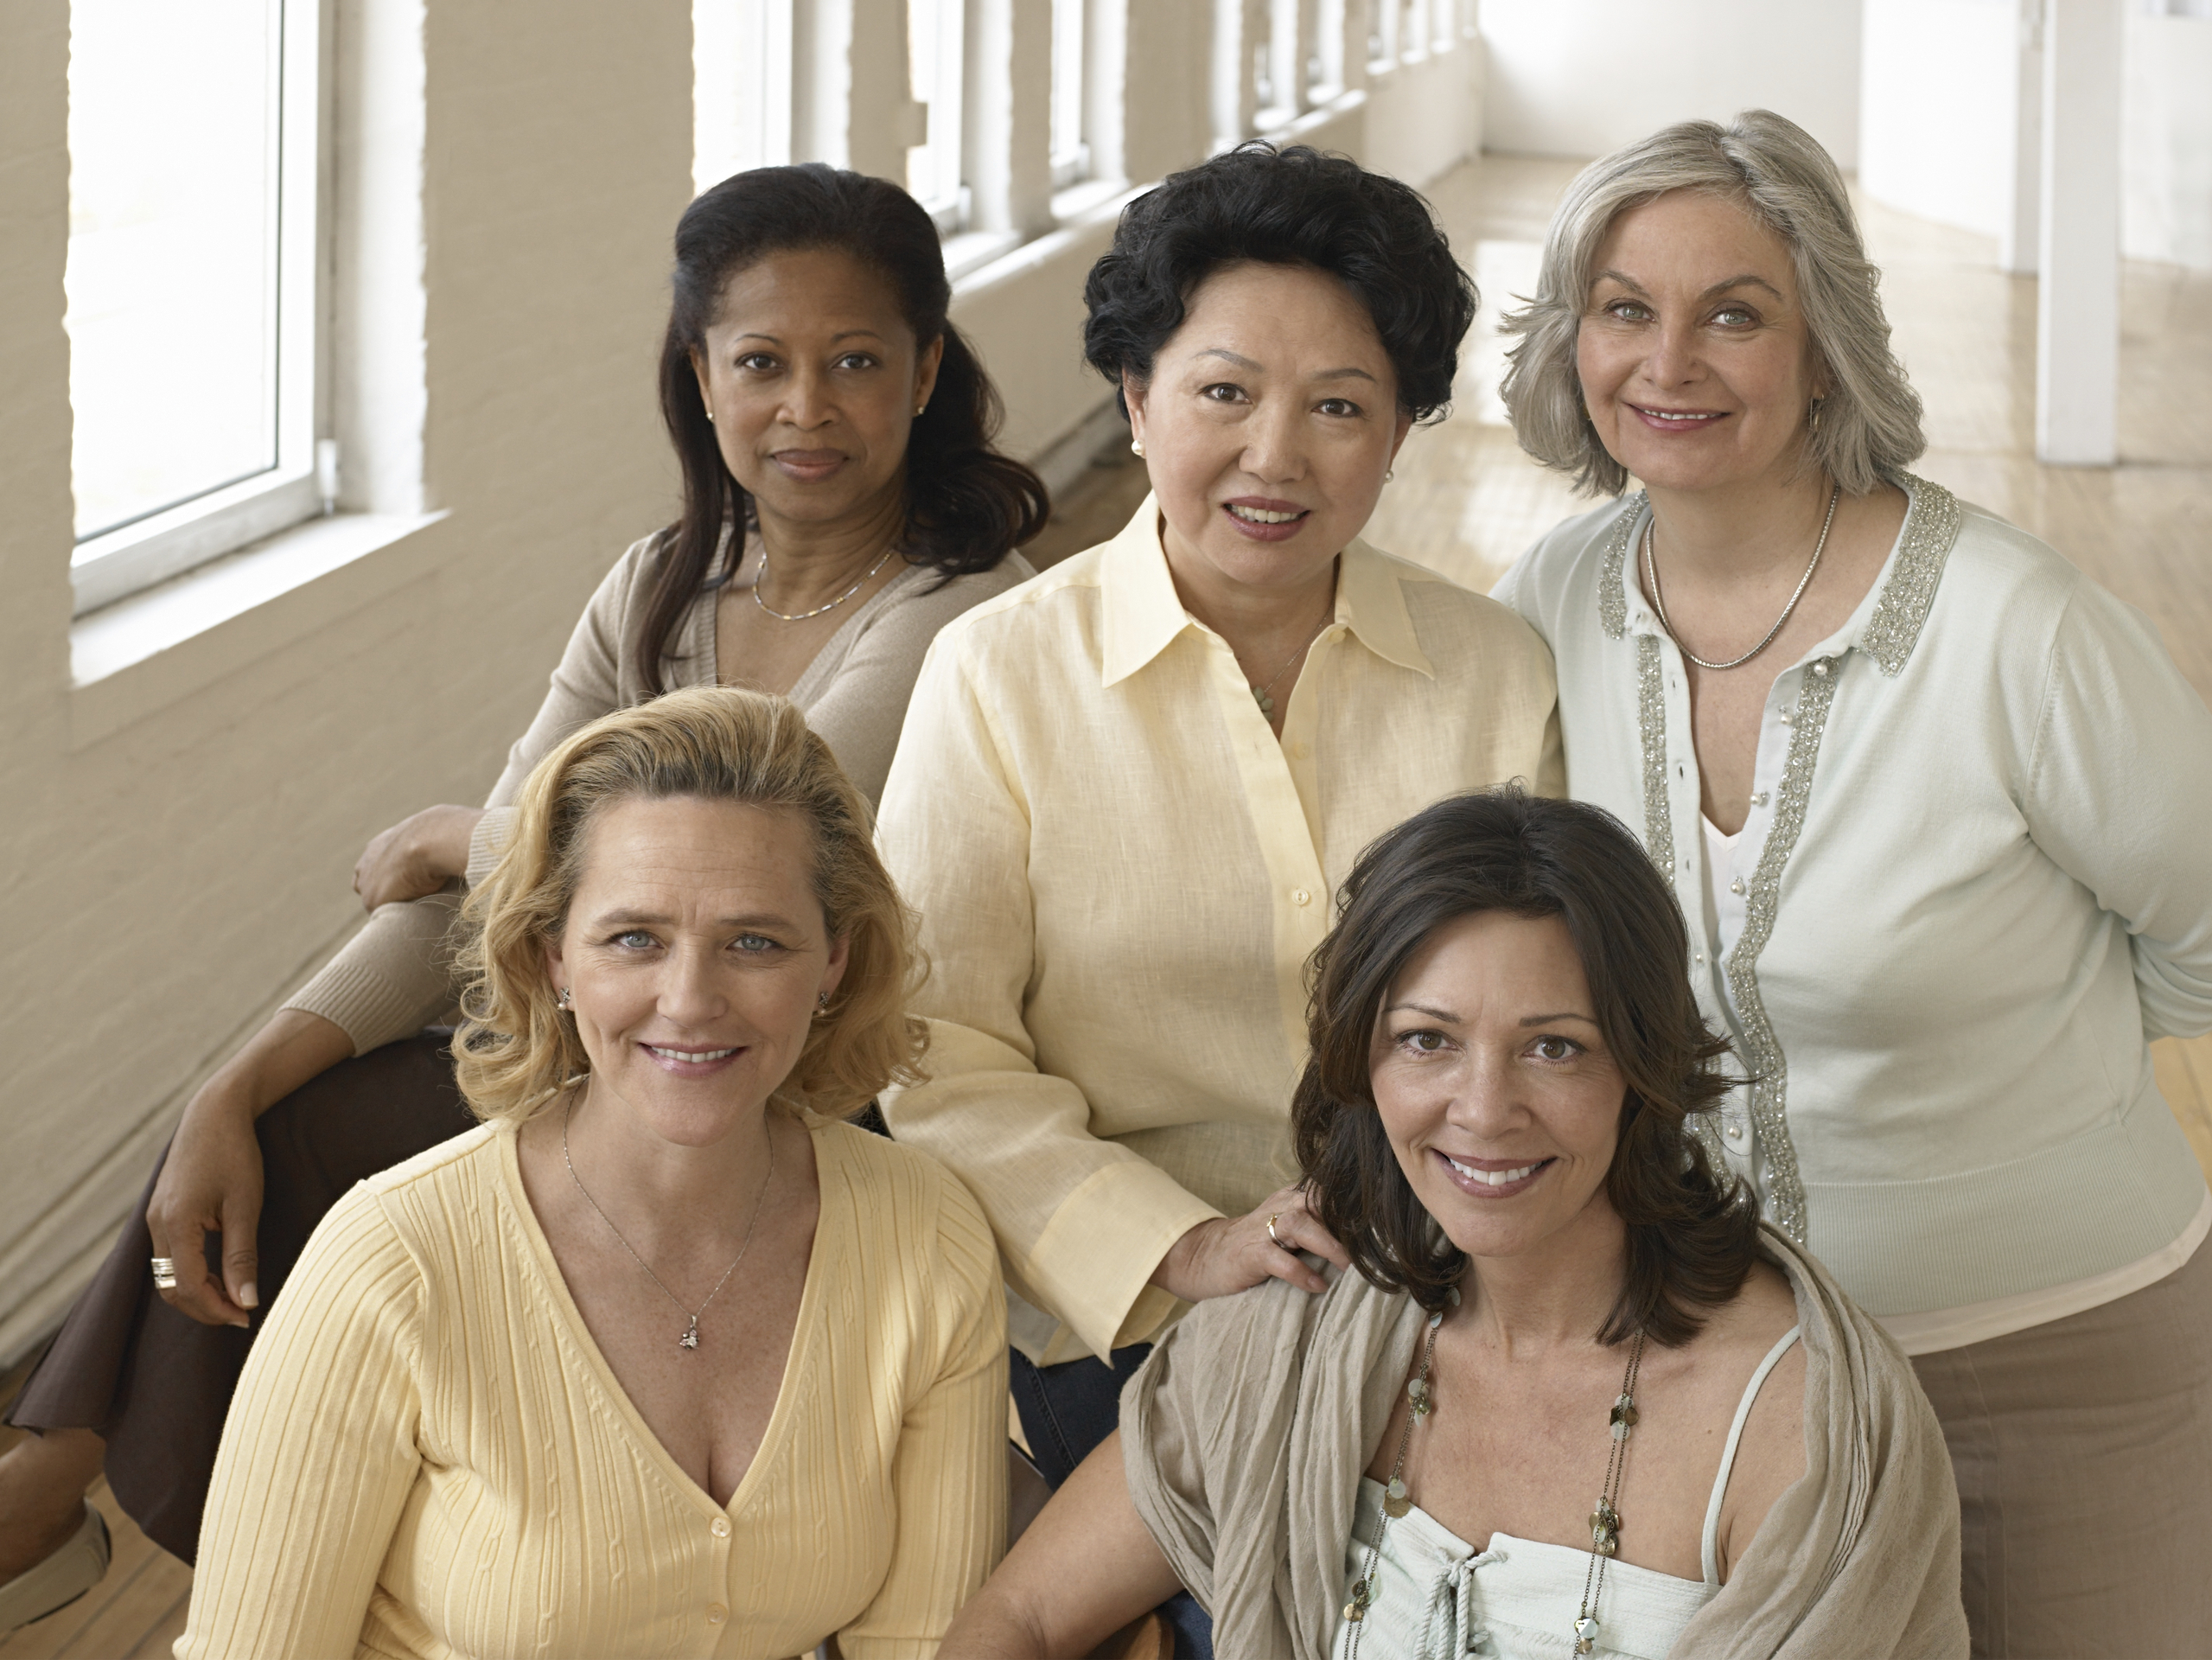 Hormone Therapy In Postmenopausal Women: Primary Prevention of Chronic Conditions